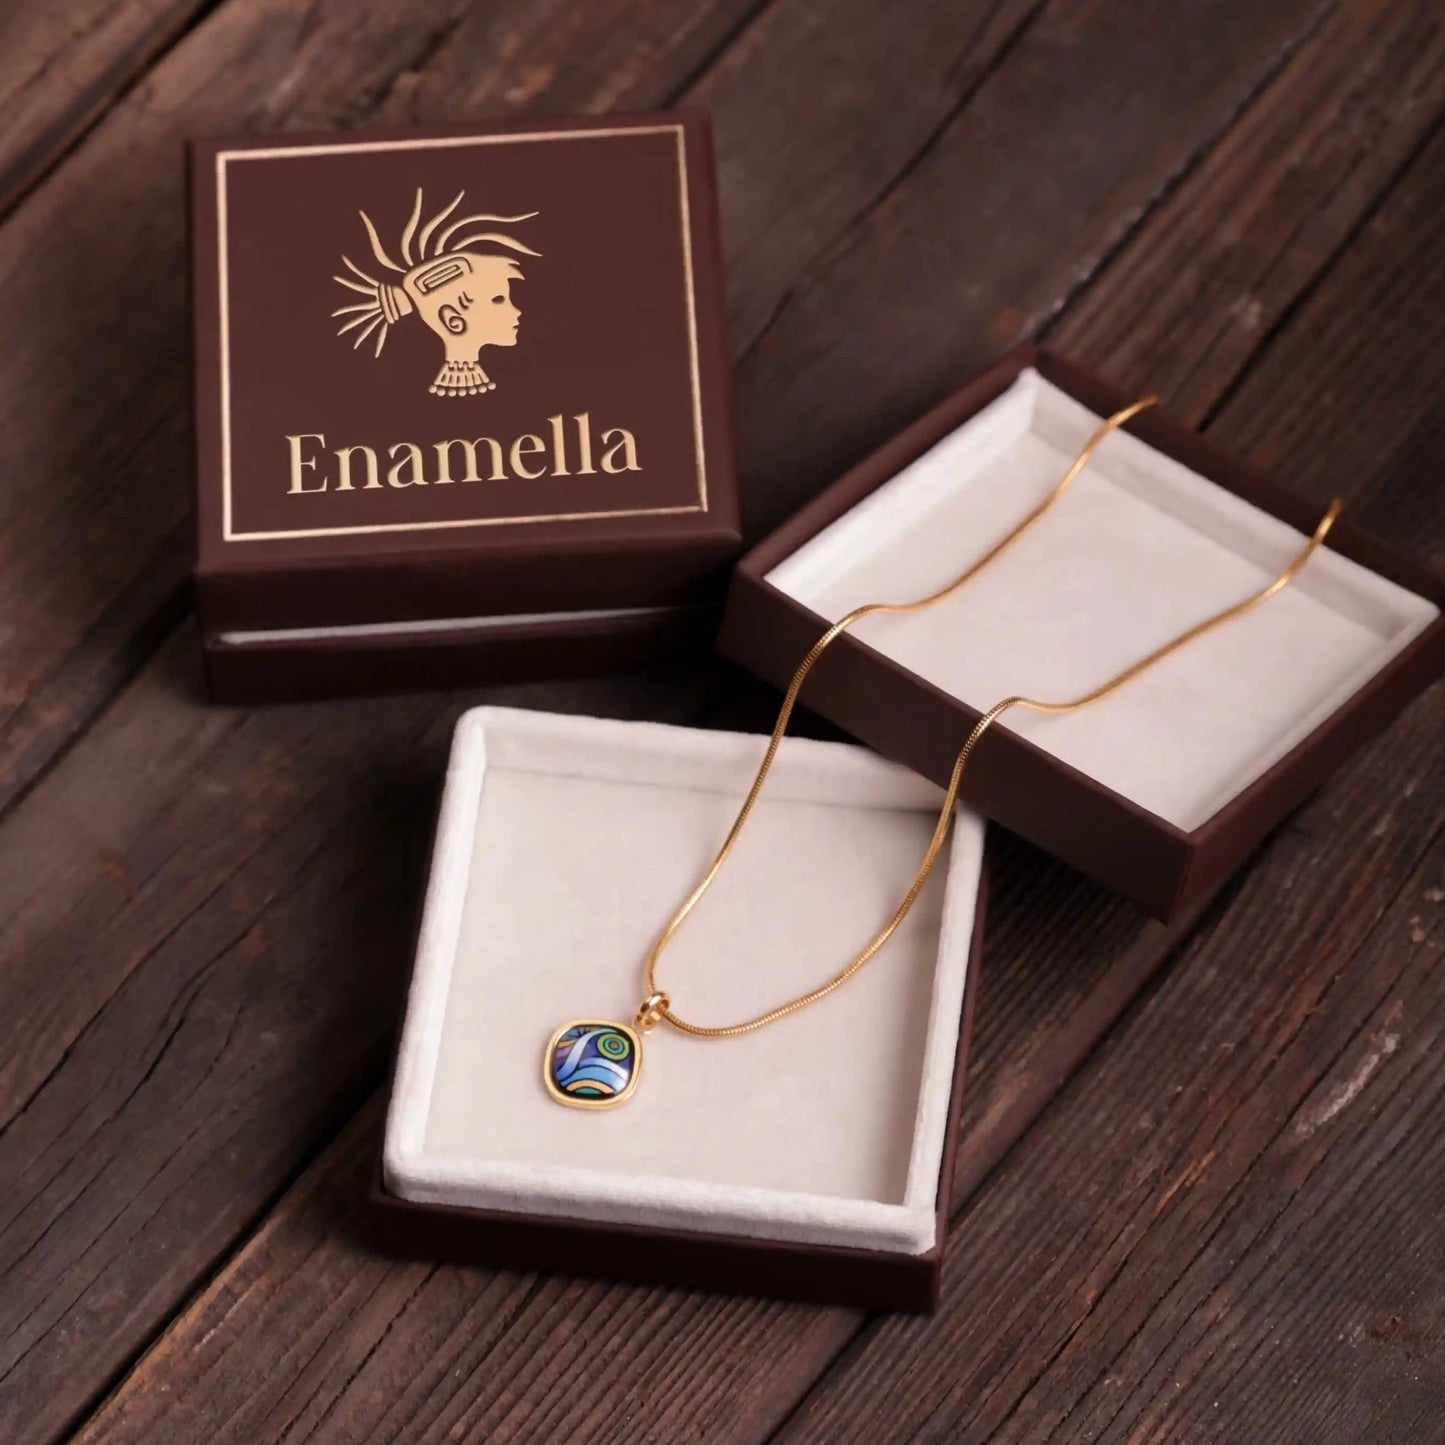 Yellow gold necklace with the painting of Van Gogh's "Starry Night". The necklace is placed in a box